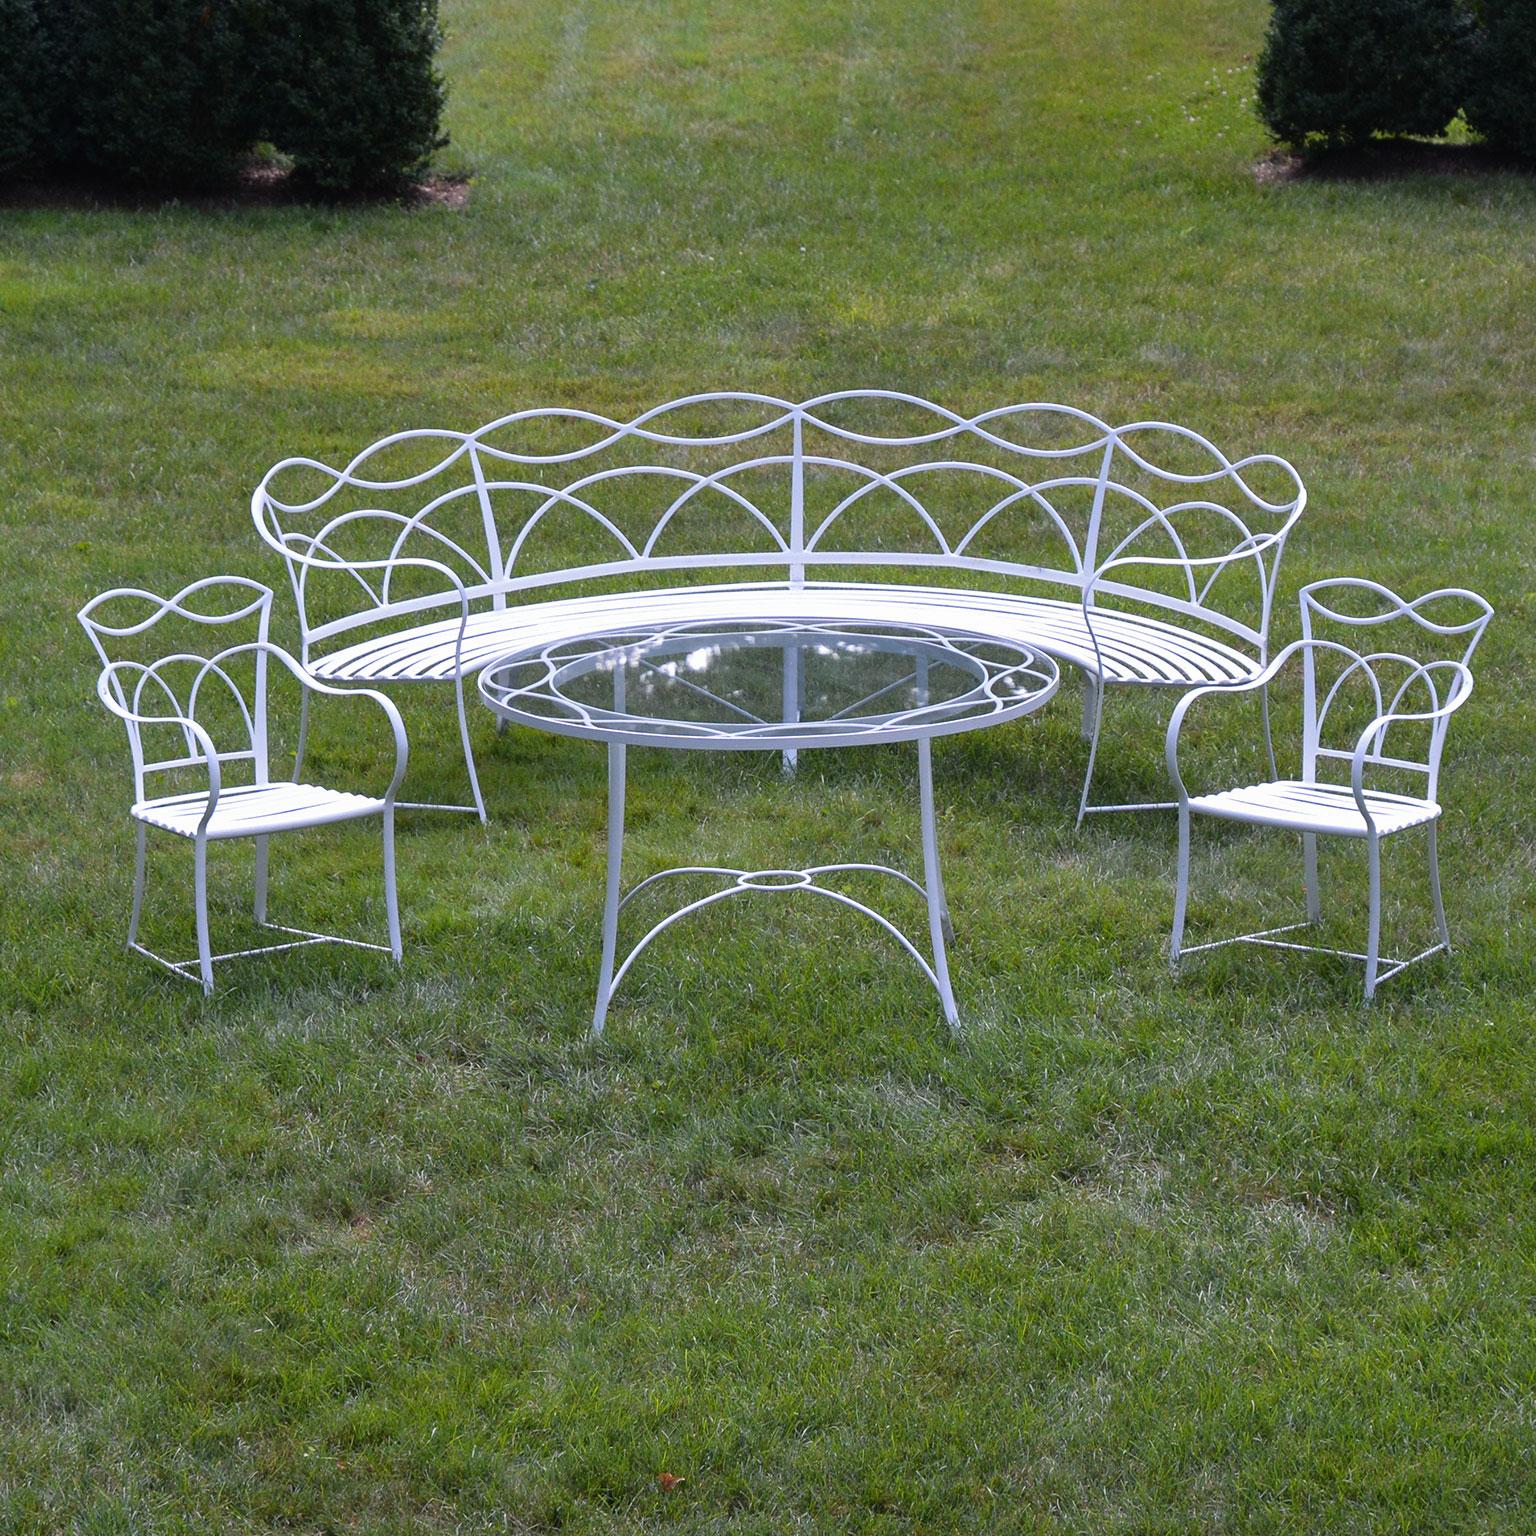 A suite of wrought-iron furniture manufactured by Leinfelder & Sons of Lacrosse, WI, comprised of one curved settee, one round dining table, and two armchairs, circa 1930. Table is 29 ins. high and 48 ins. in diameter. Curved bench is 32 ins. high,